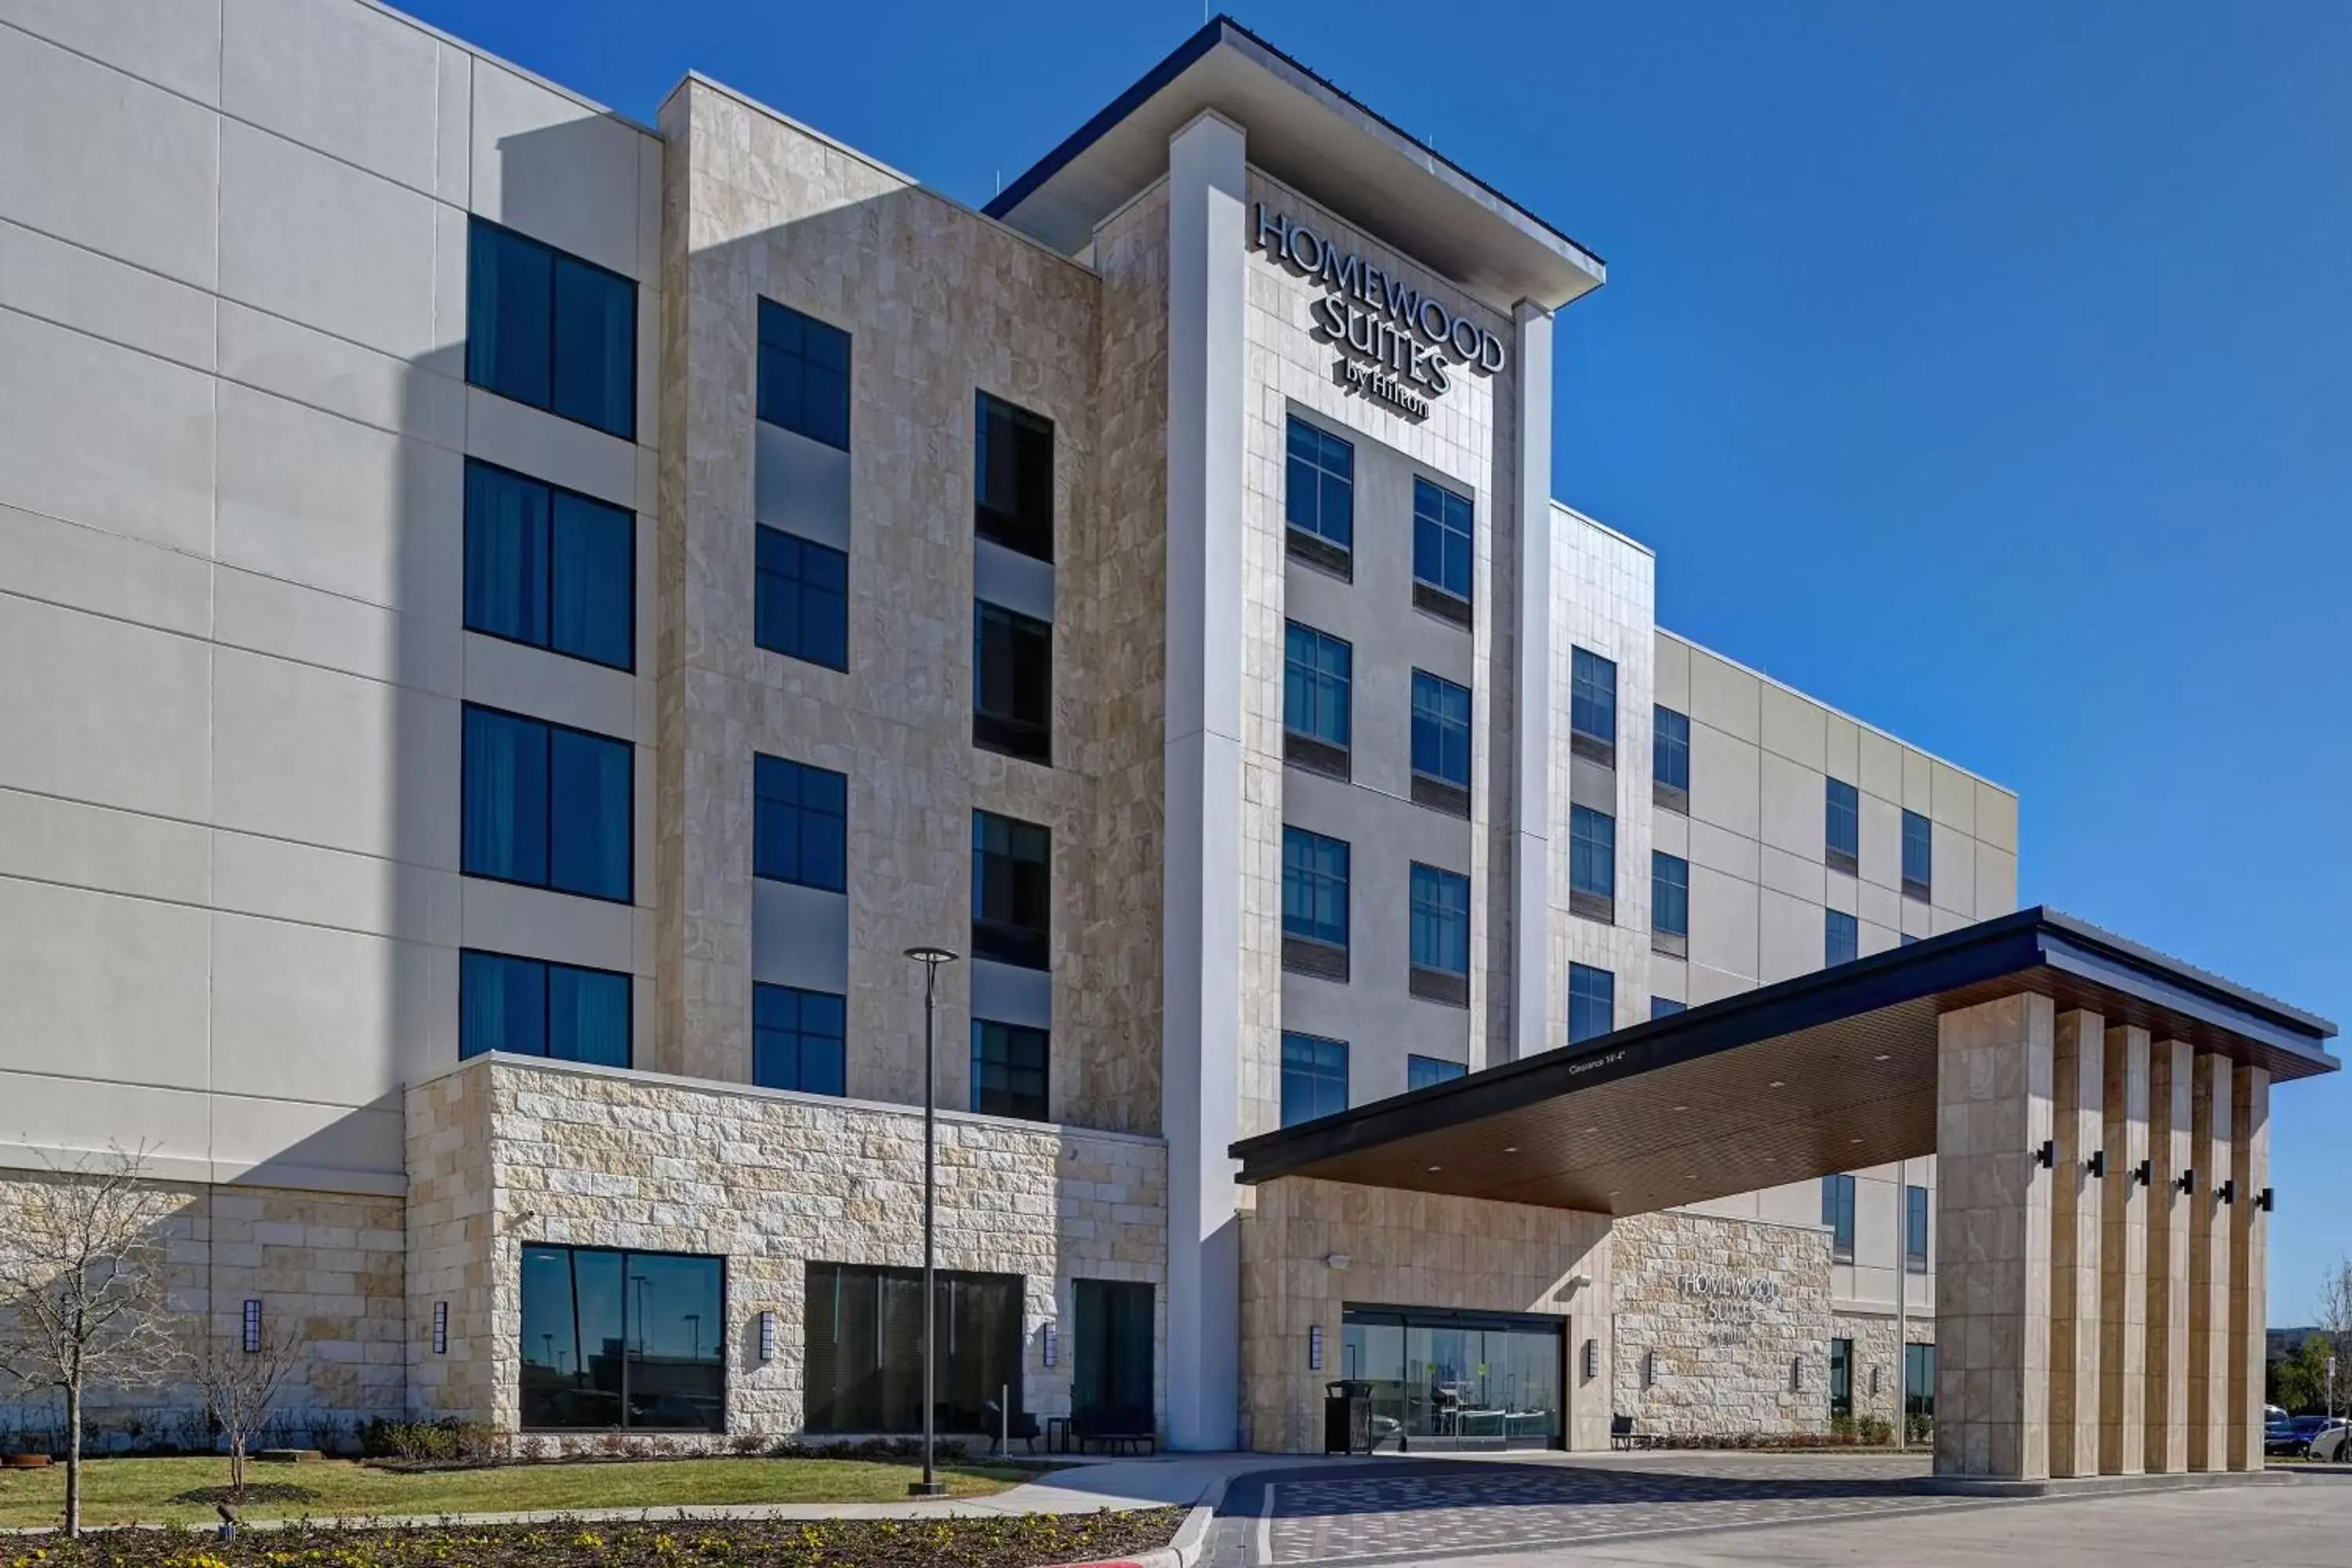 Property Building in Homewood Suites by Hilton Dallas The Colony